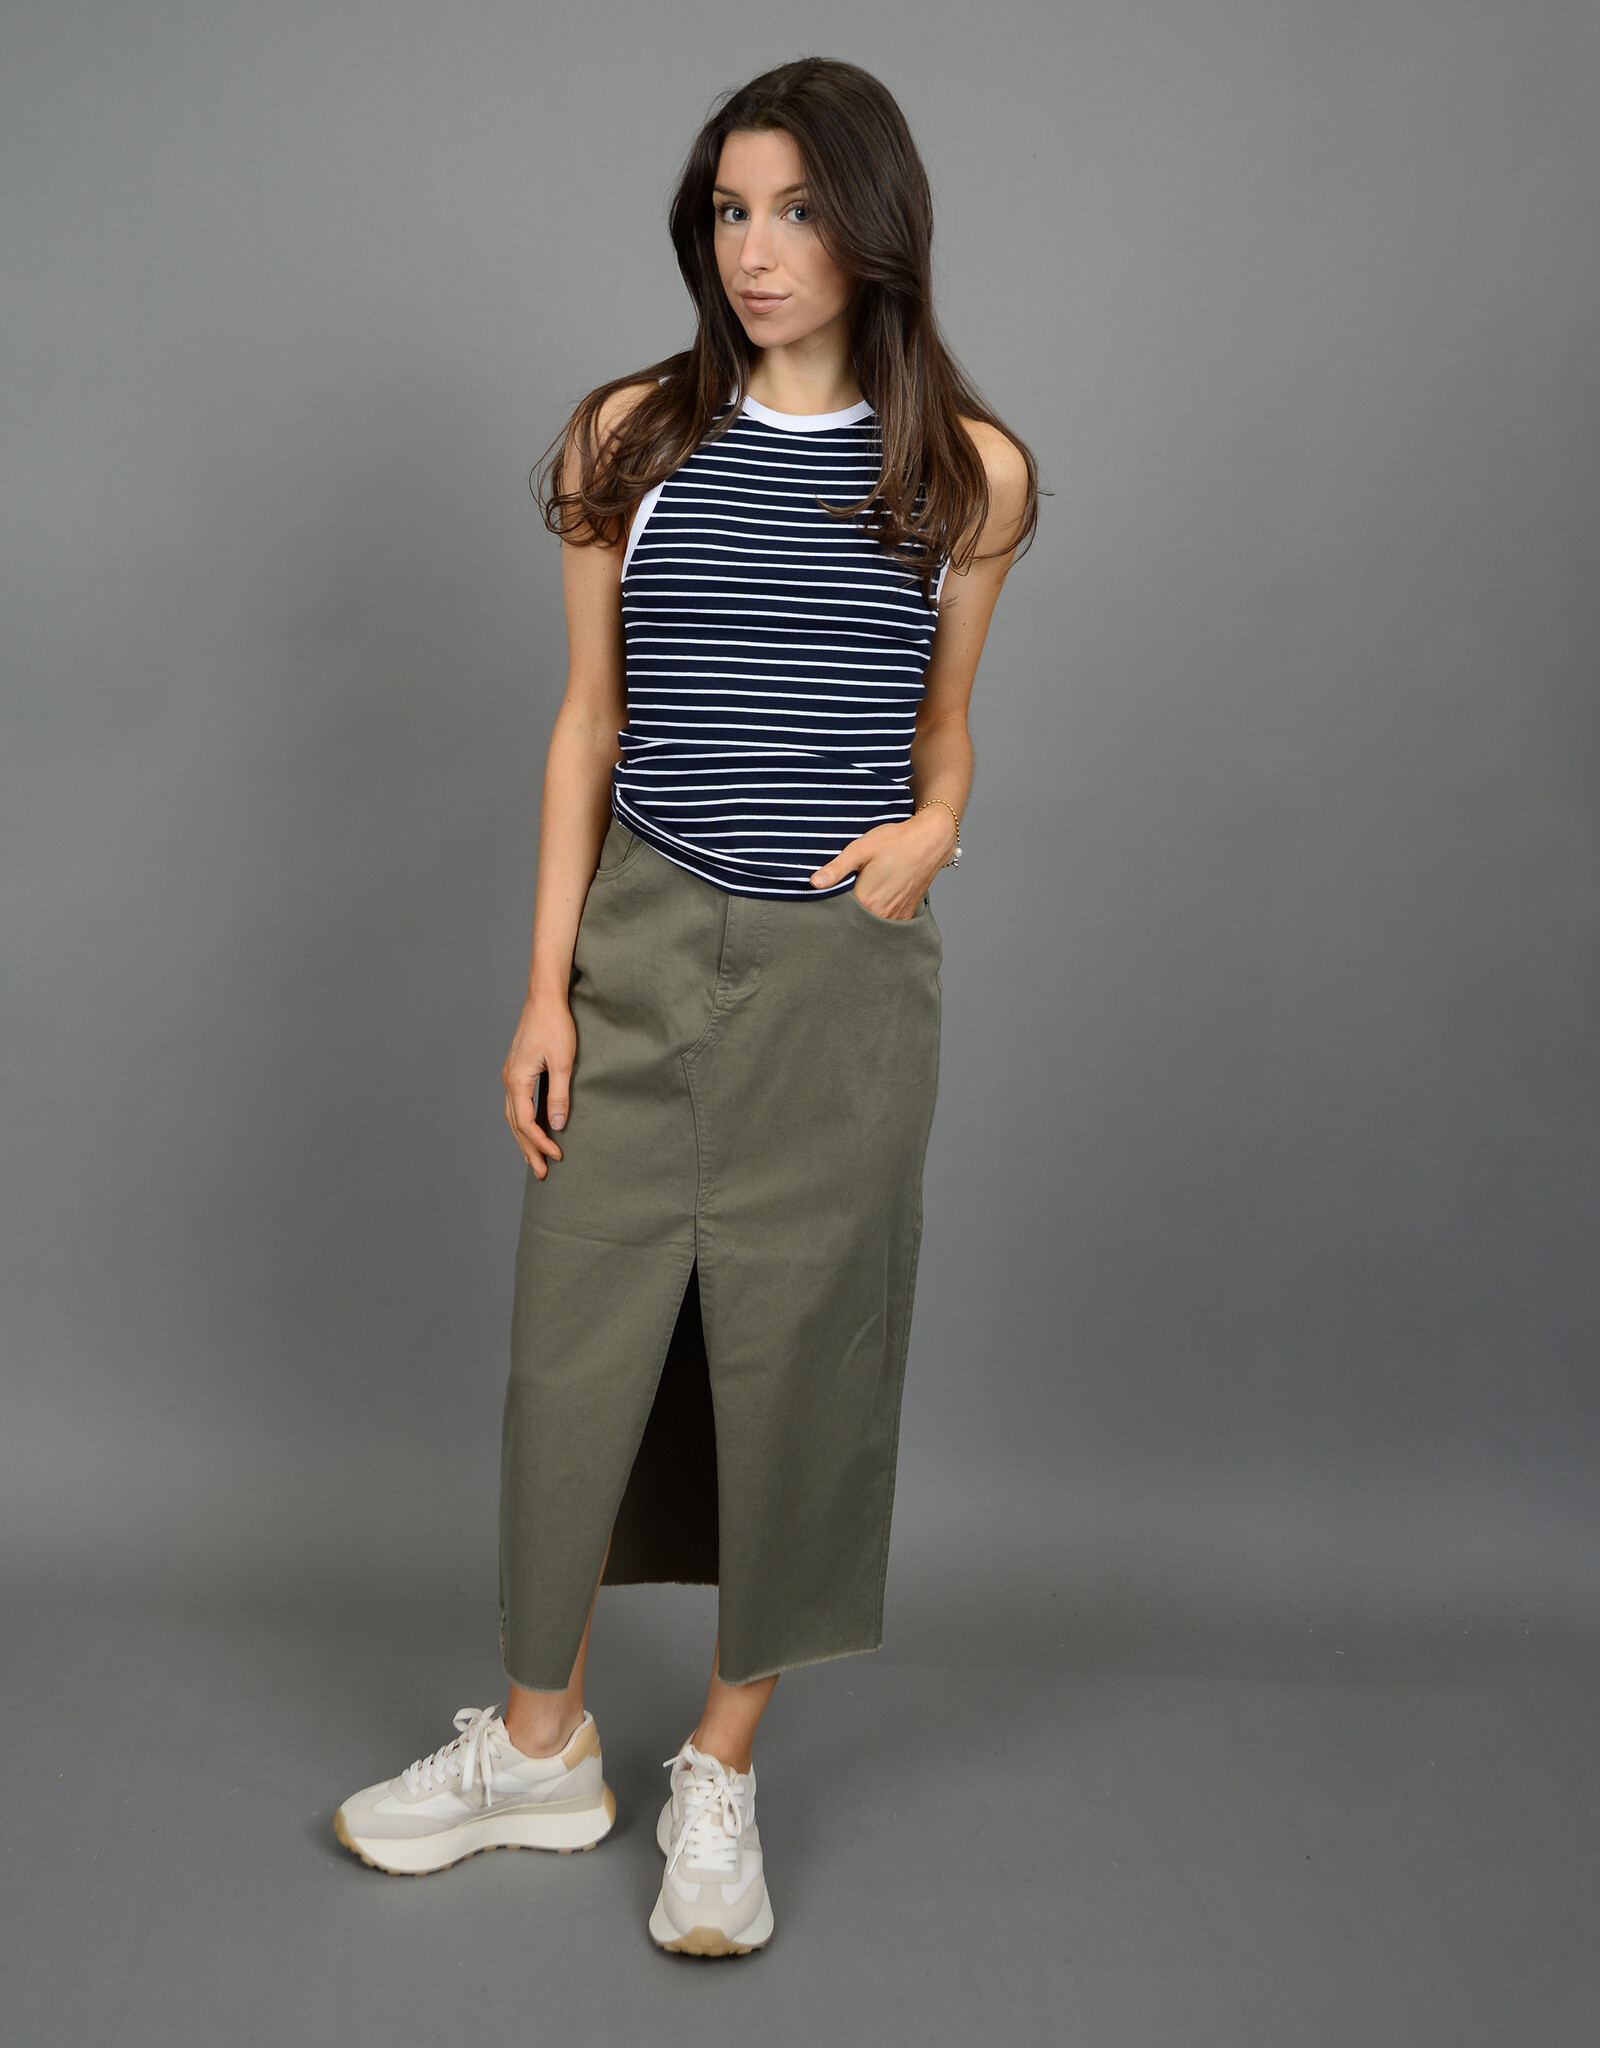 RD Style RD Seraphina Stretch Twill Skirt